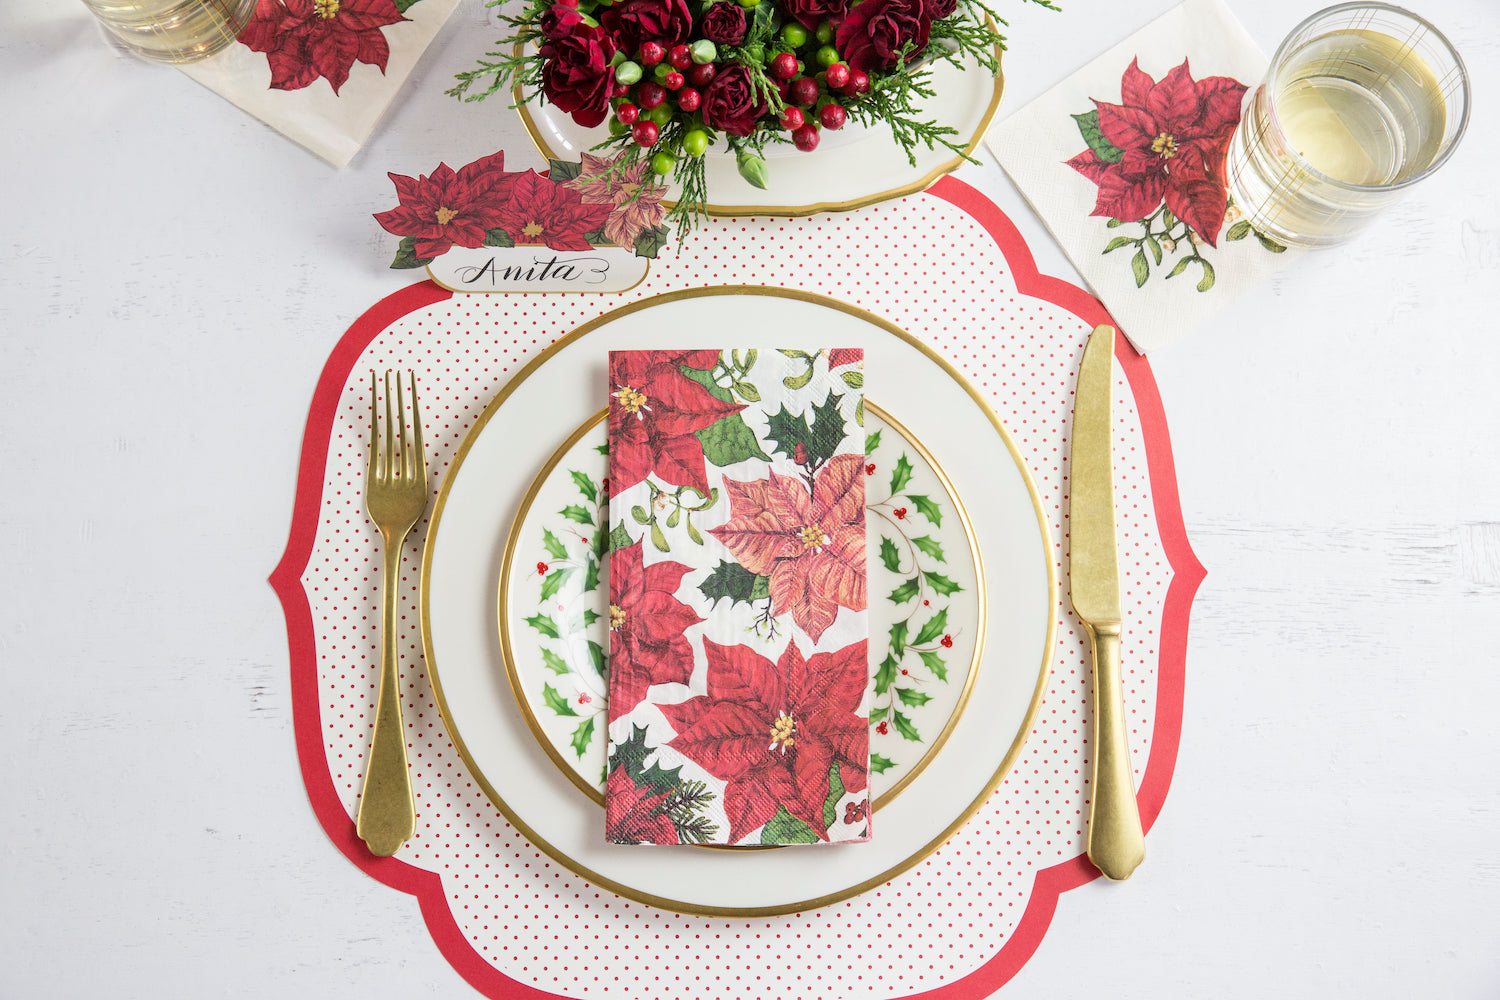 Festive Christmas Die-cut Red Swiss Dot placemats perfect for enhancing your tablescape in the USA during the holiday season. Hester &amp; Cook